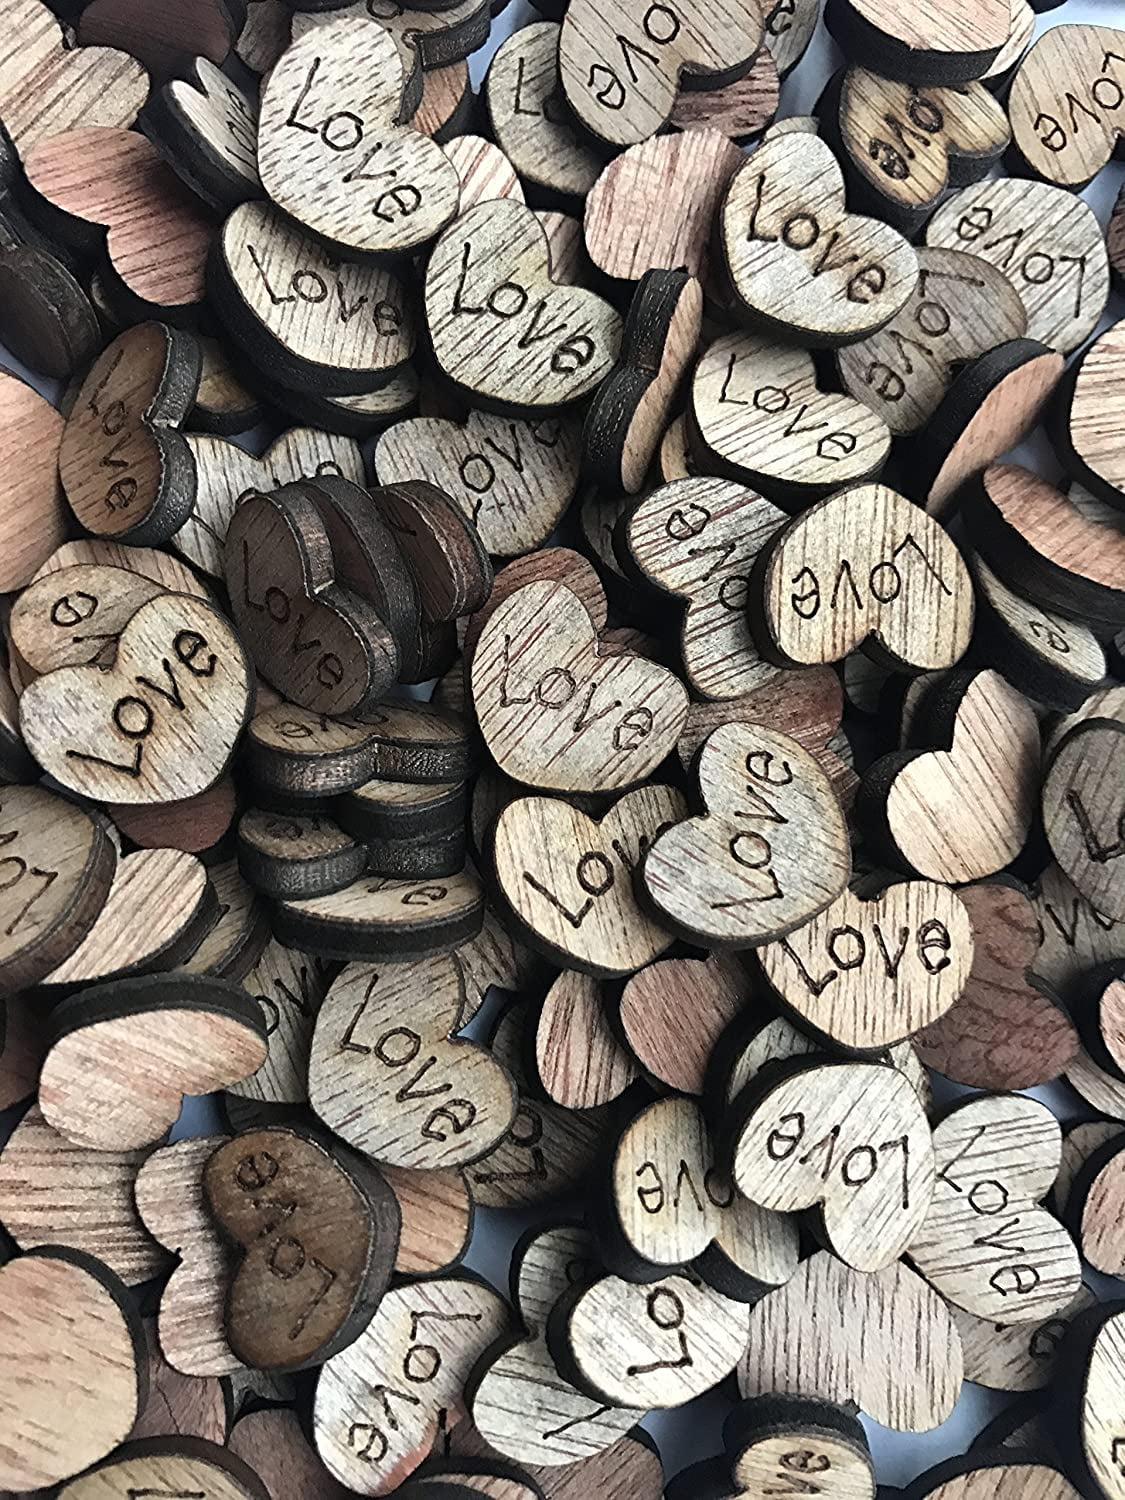 Rustic Wooden Love Heart Wedding Table Scatter Decoration Crafts Decor YD 